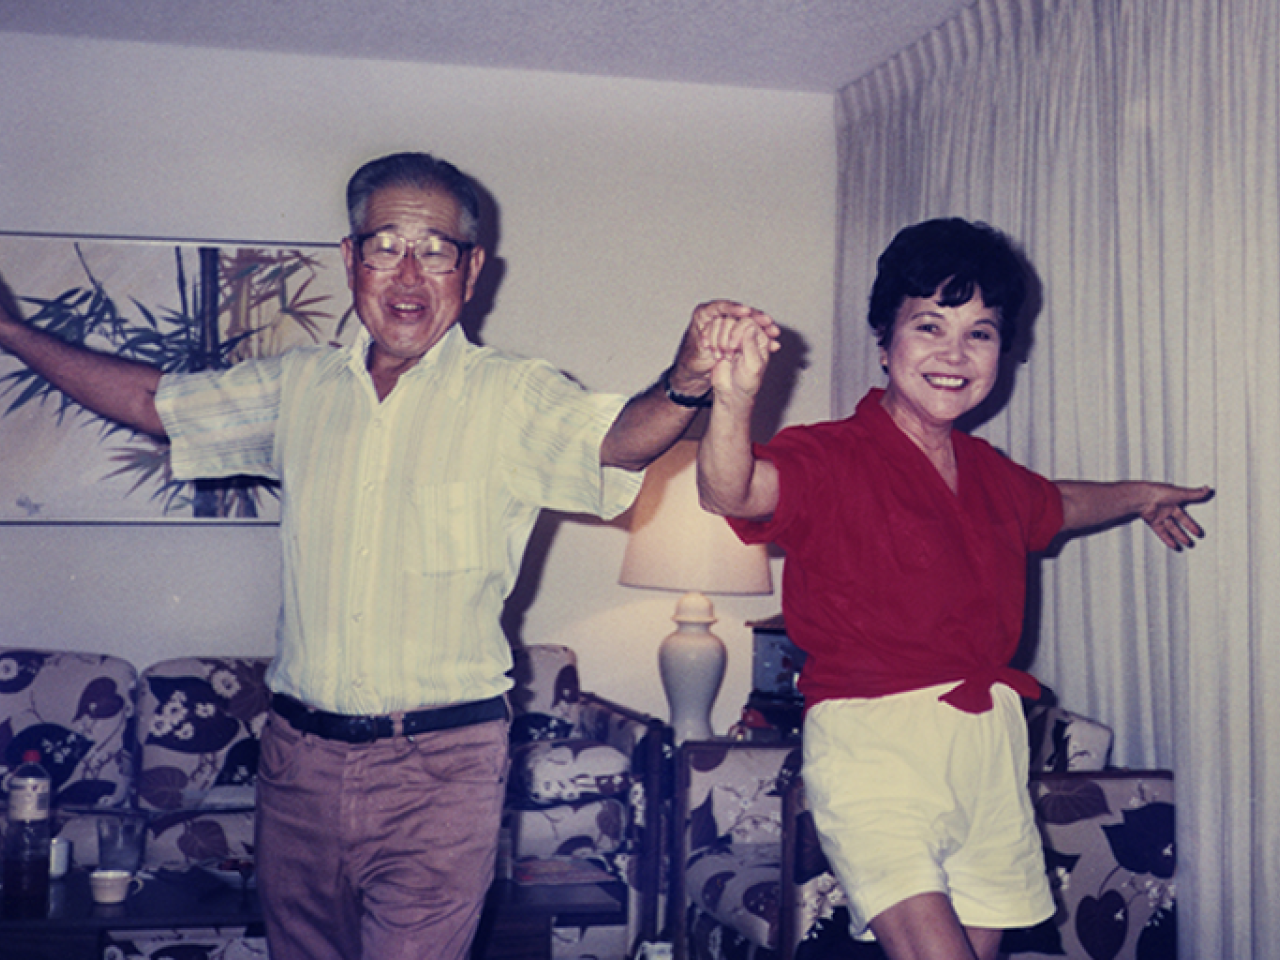 A middle-aged Japanese-American couple hold hands and dance in their living room. Their faces are lit with smiles as they face the camera, arms extended.